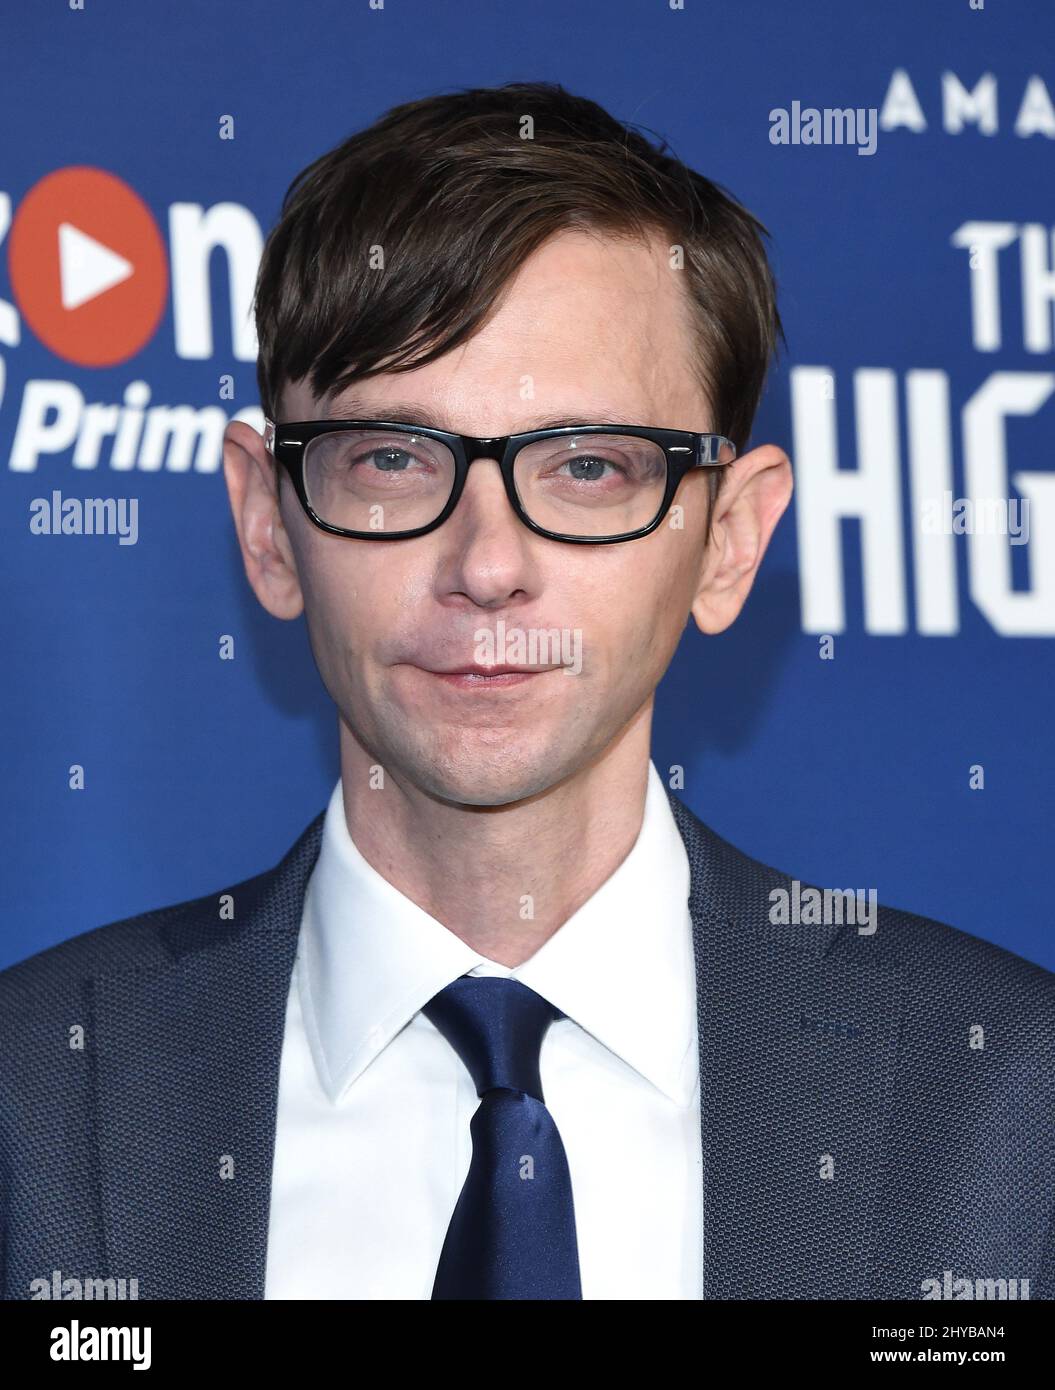 https://c8.alamy.com/comp/2HYBAN4/dj-qualls-attending-amazons-season-two-premiere-of-the-man-in-the-high-castle-held-at-the-pacific-design-center-2HYBAN4.jpg